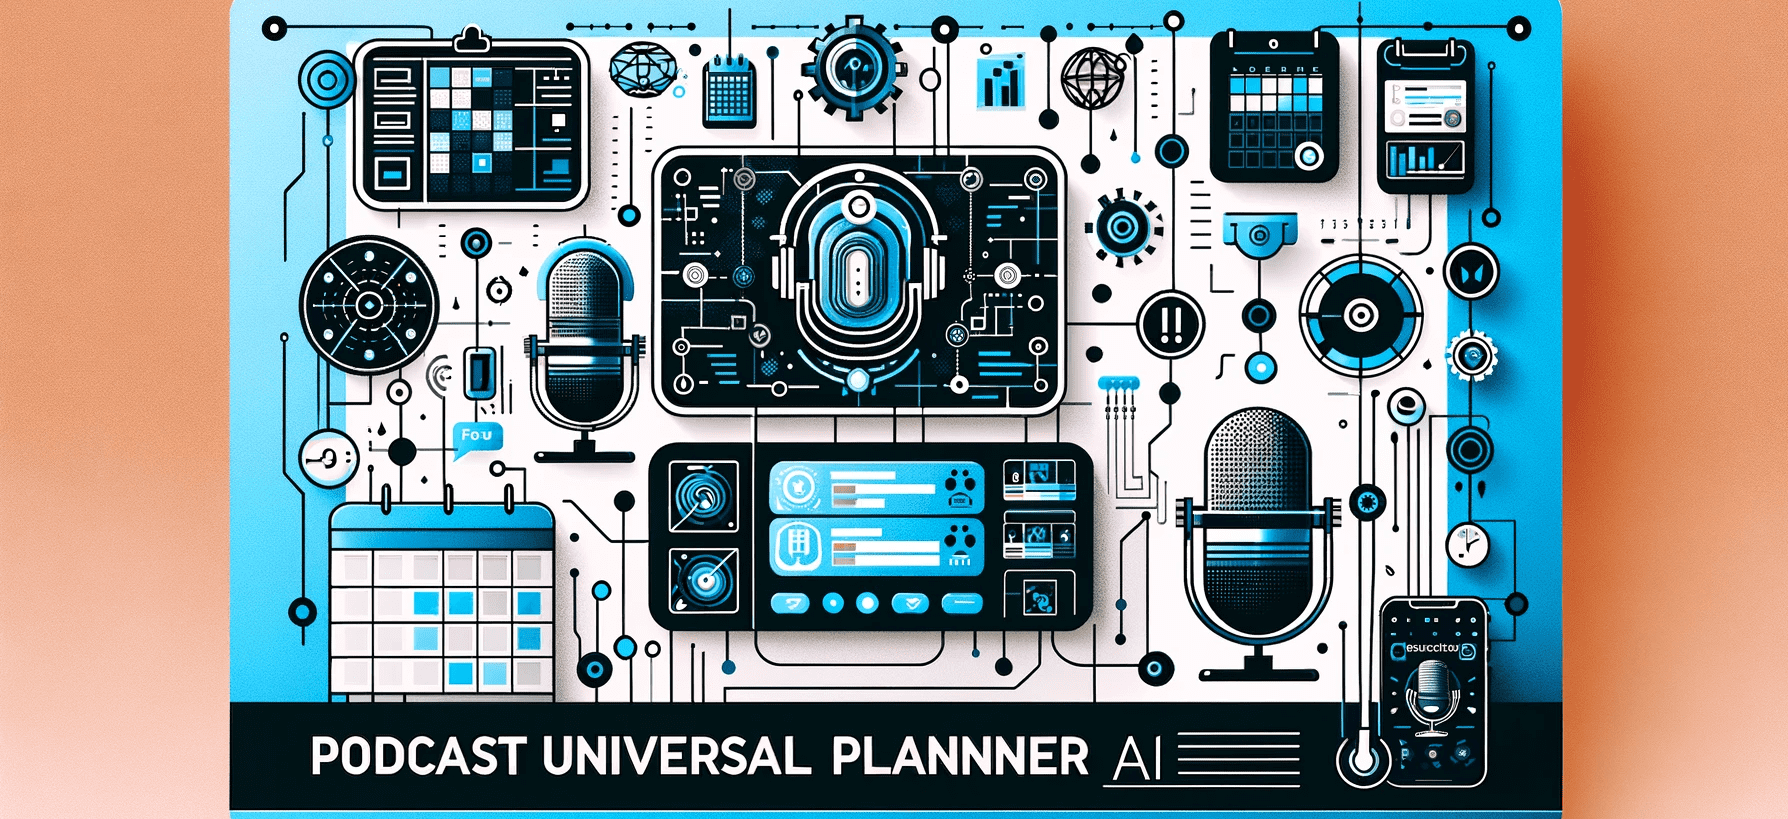 Podcast Universal Planner by GPTixy